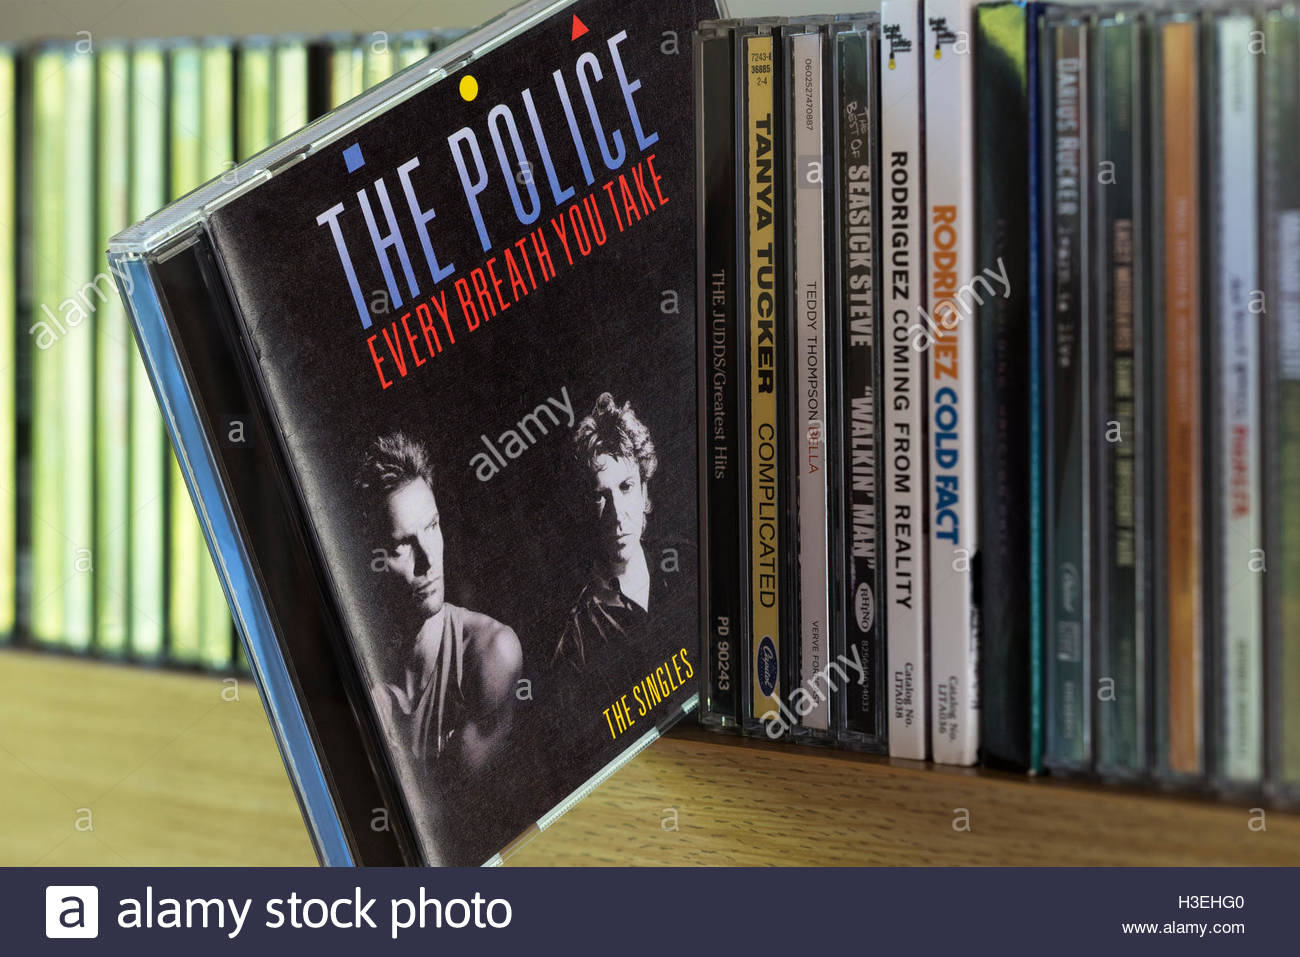 The Police Every Breath You Take The Singles 1986 Cd Pulled Out Stock Photo Alamy